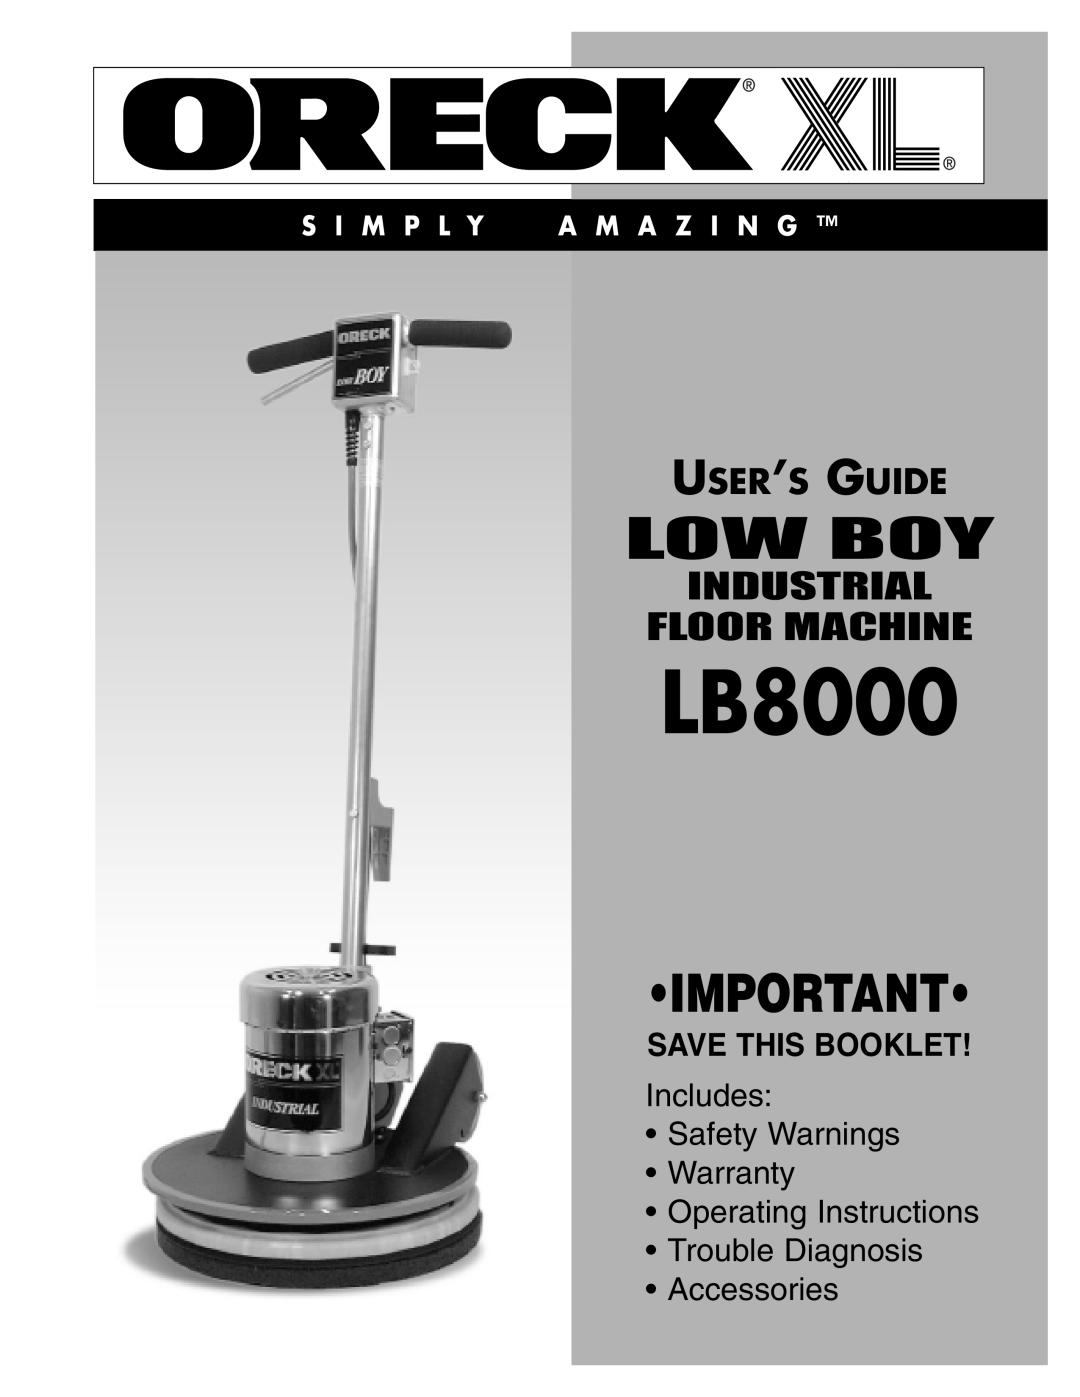 Oreck LB8000 warranty Save This Booklet, Floor Machine, Includes Safety Warnings Warranty Operating Instructions 